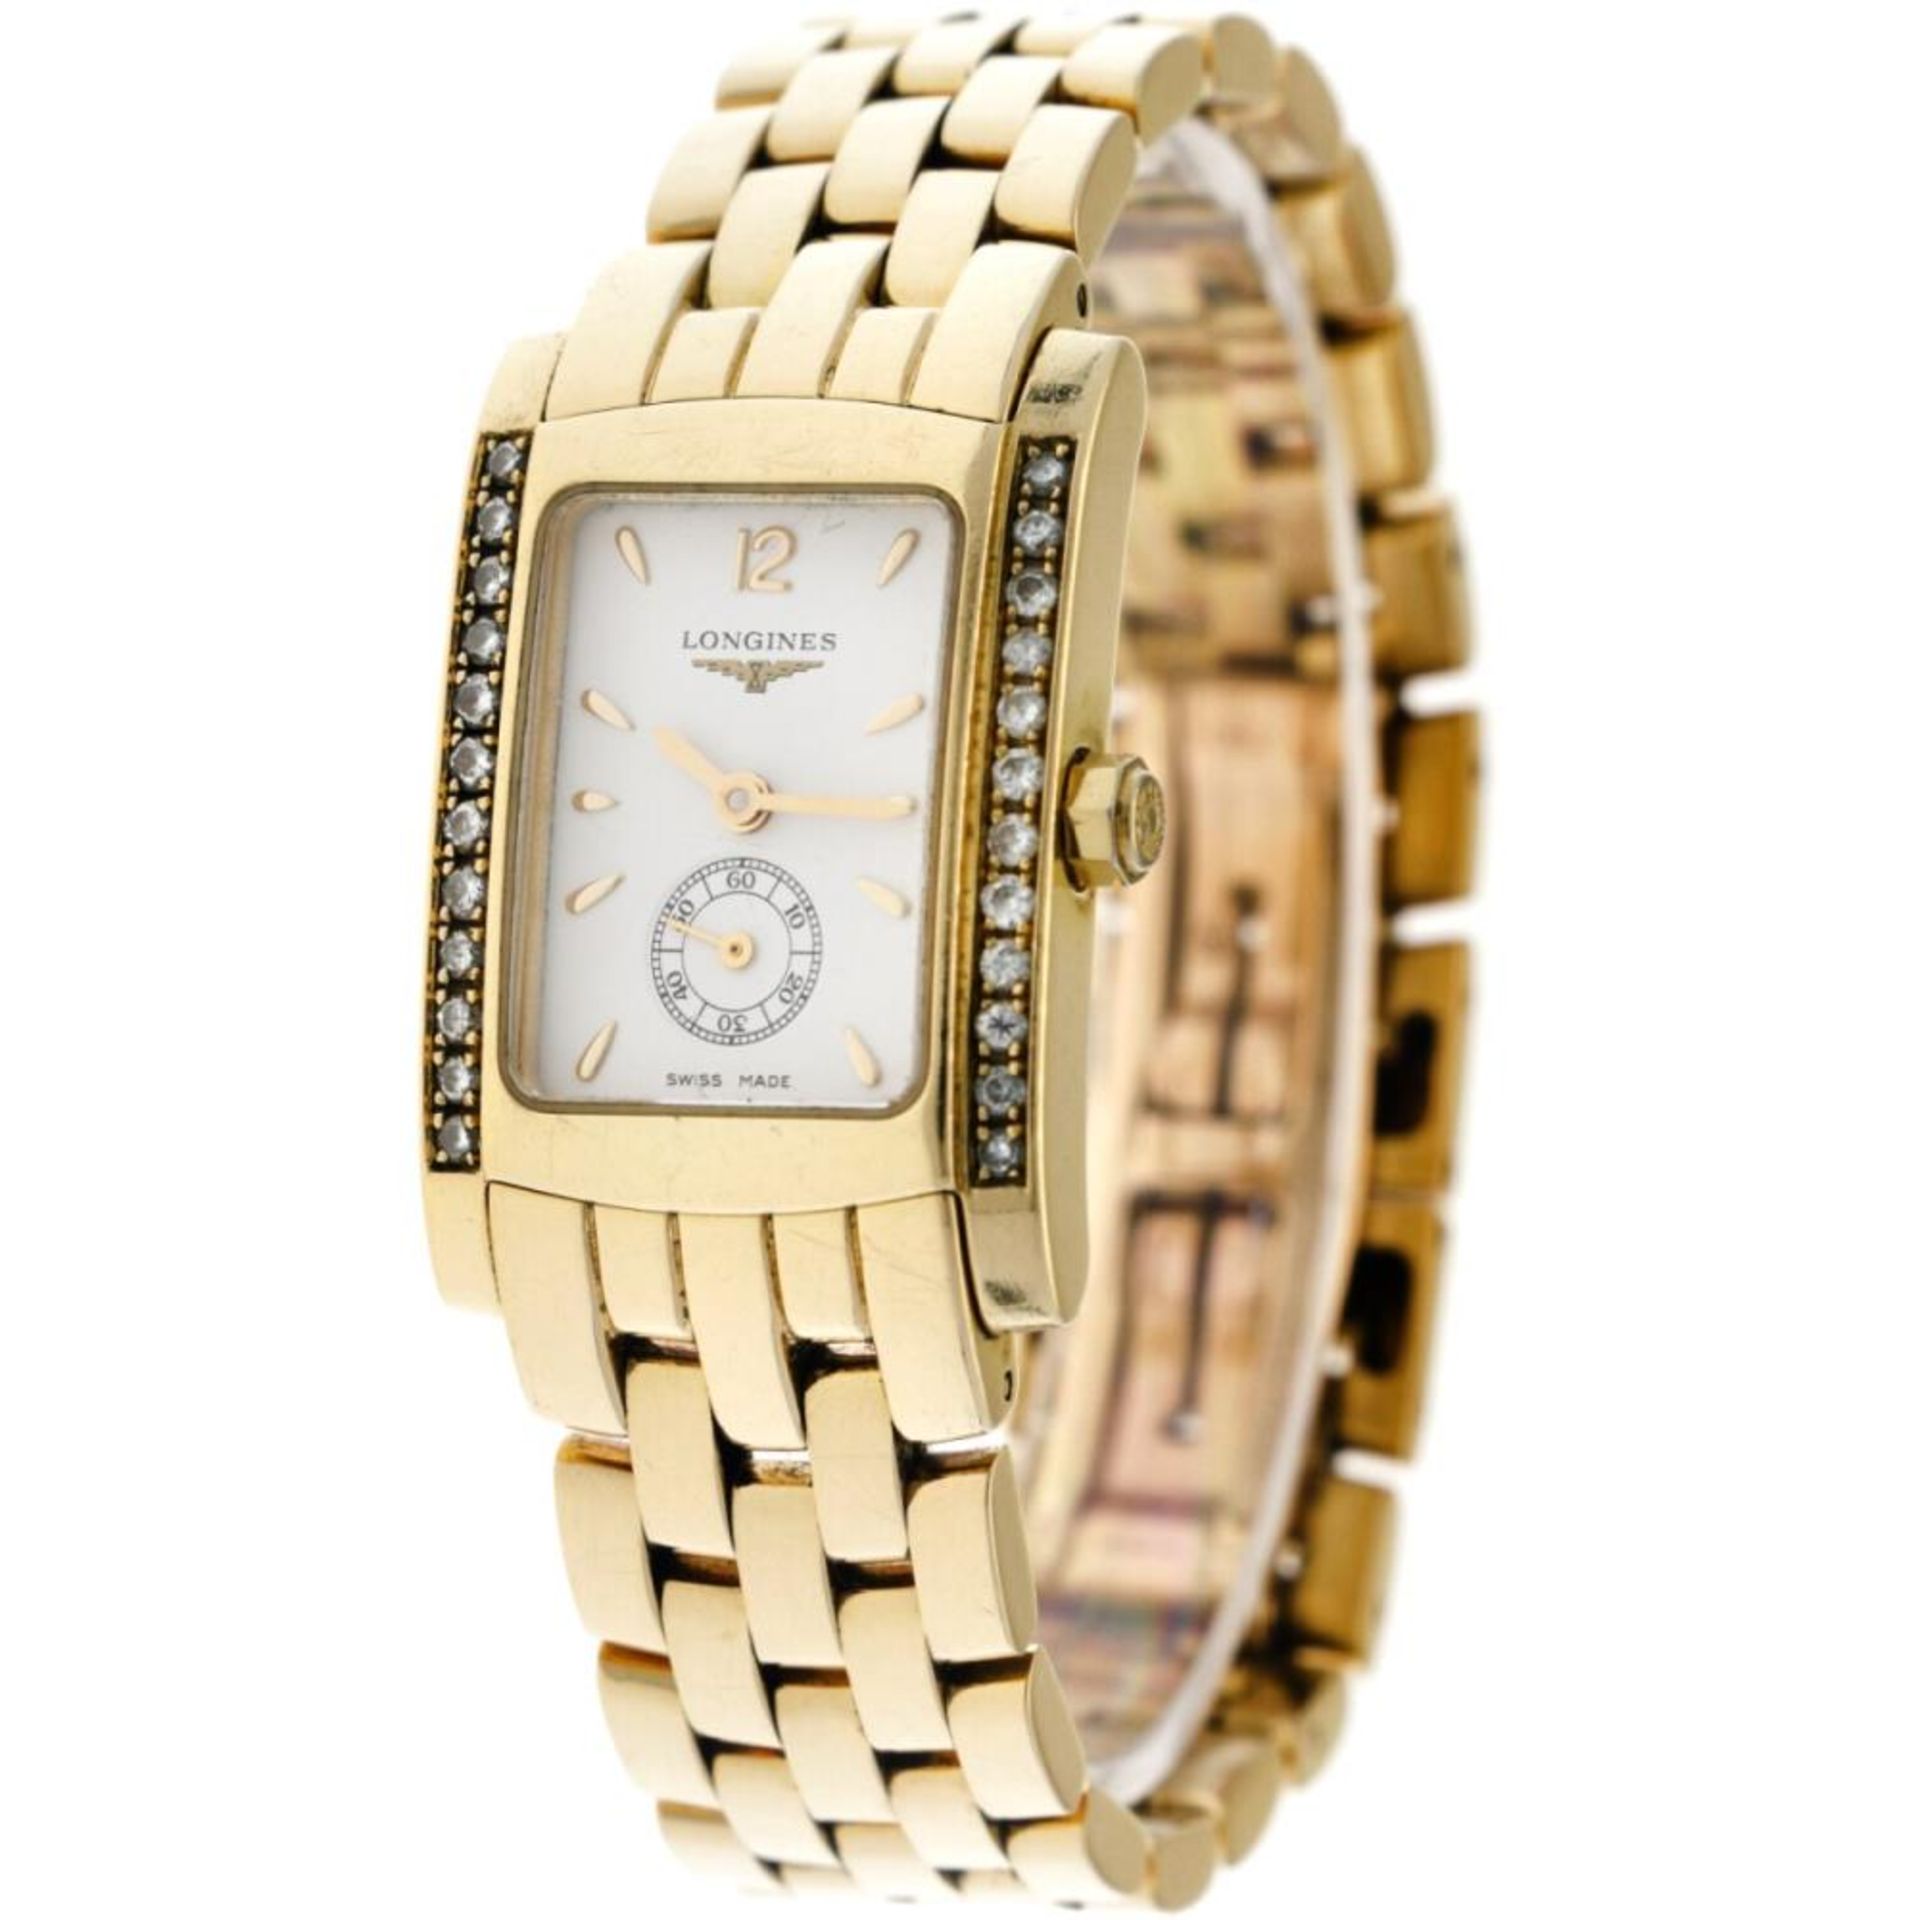 Longines Dolce Vita L51556 - Ladies watch -approx. 2005. - Image 2 of 5